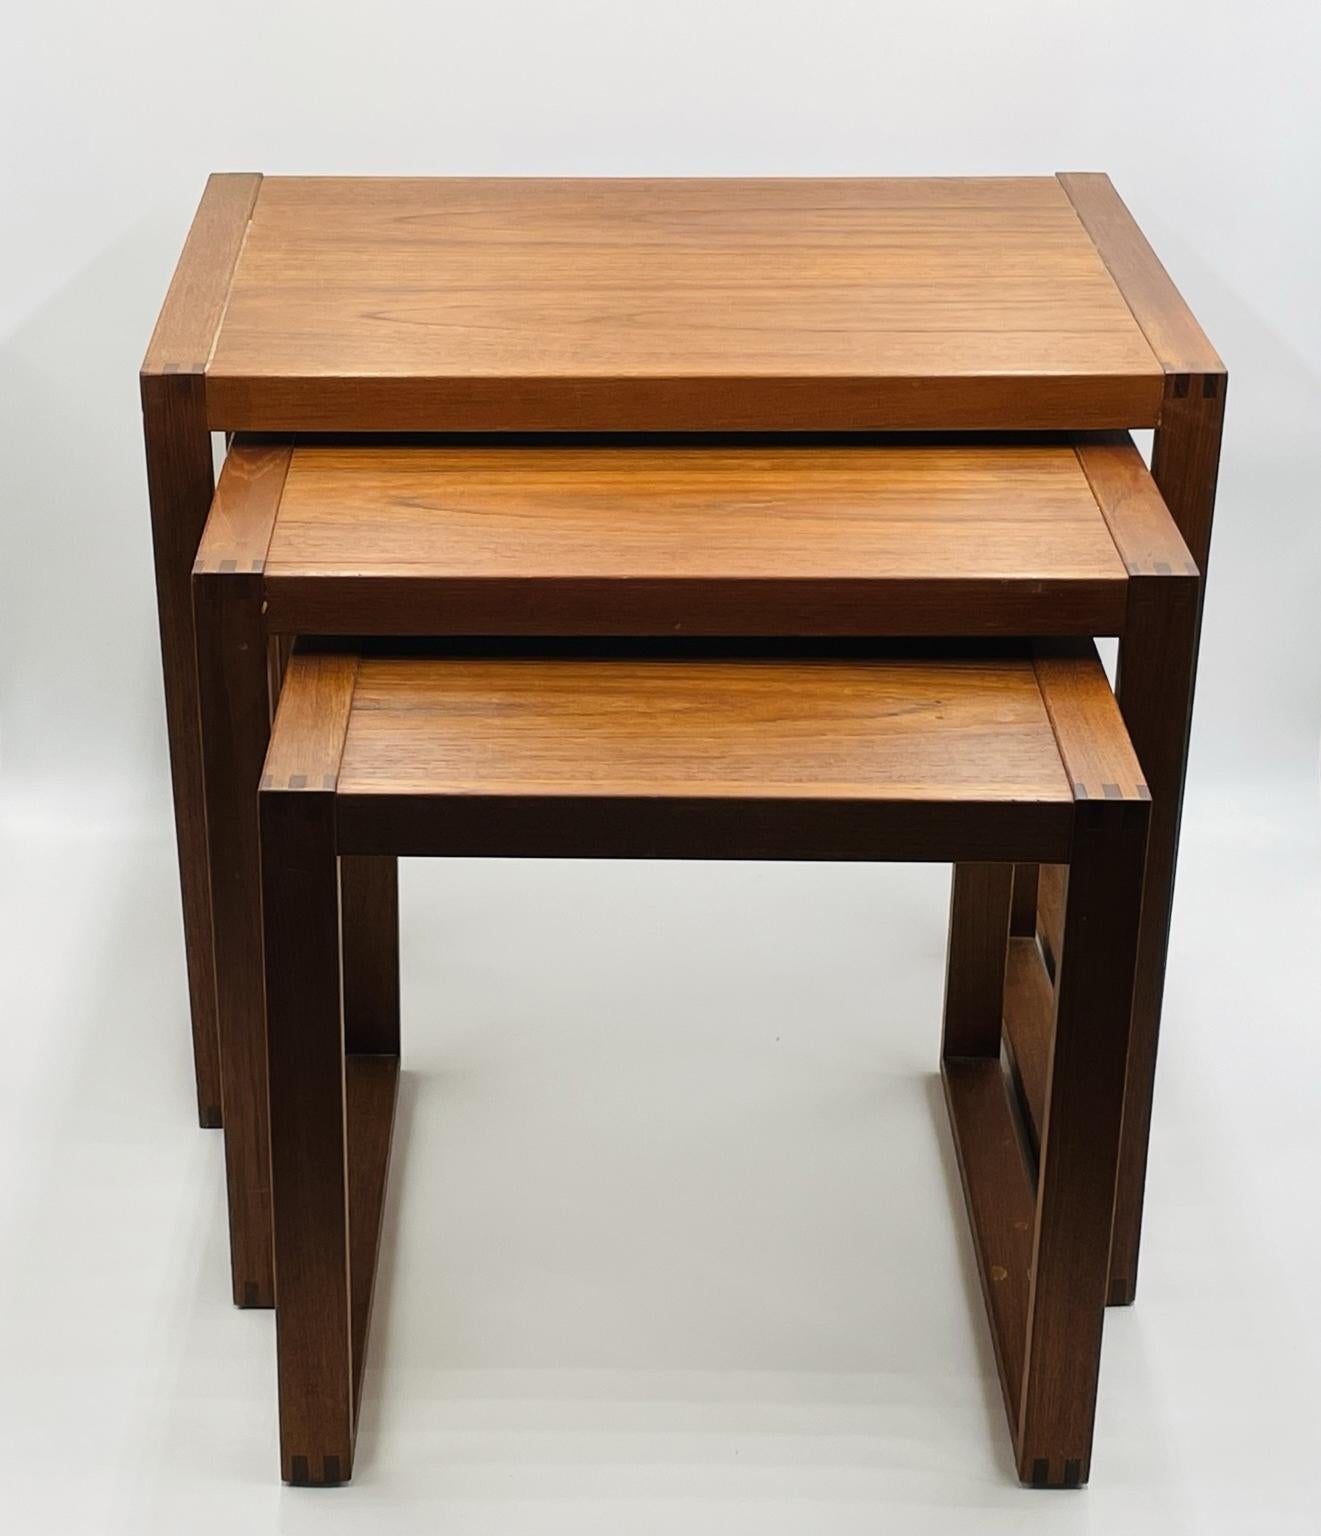 Set of Three Danish Modern Teak Nesting Tables by Vi-Ma Mobler In Good Condition For Sale In Los Angeles, CA